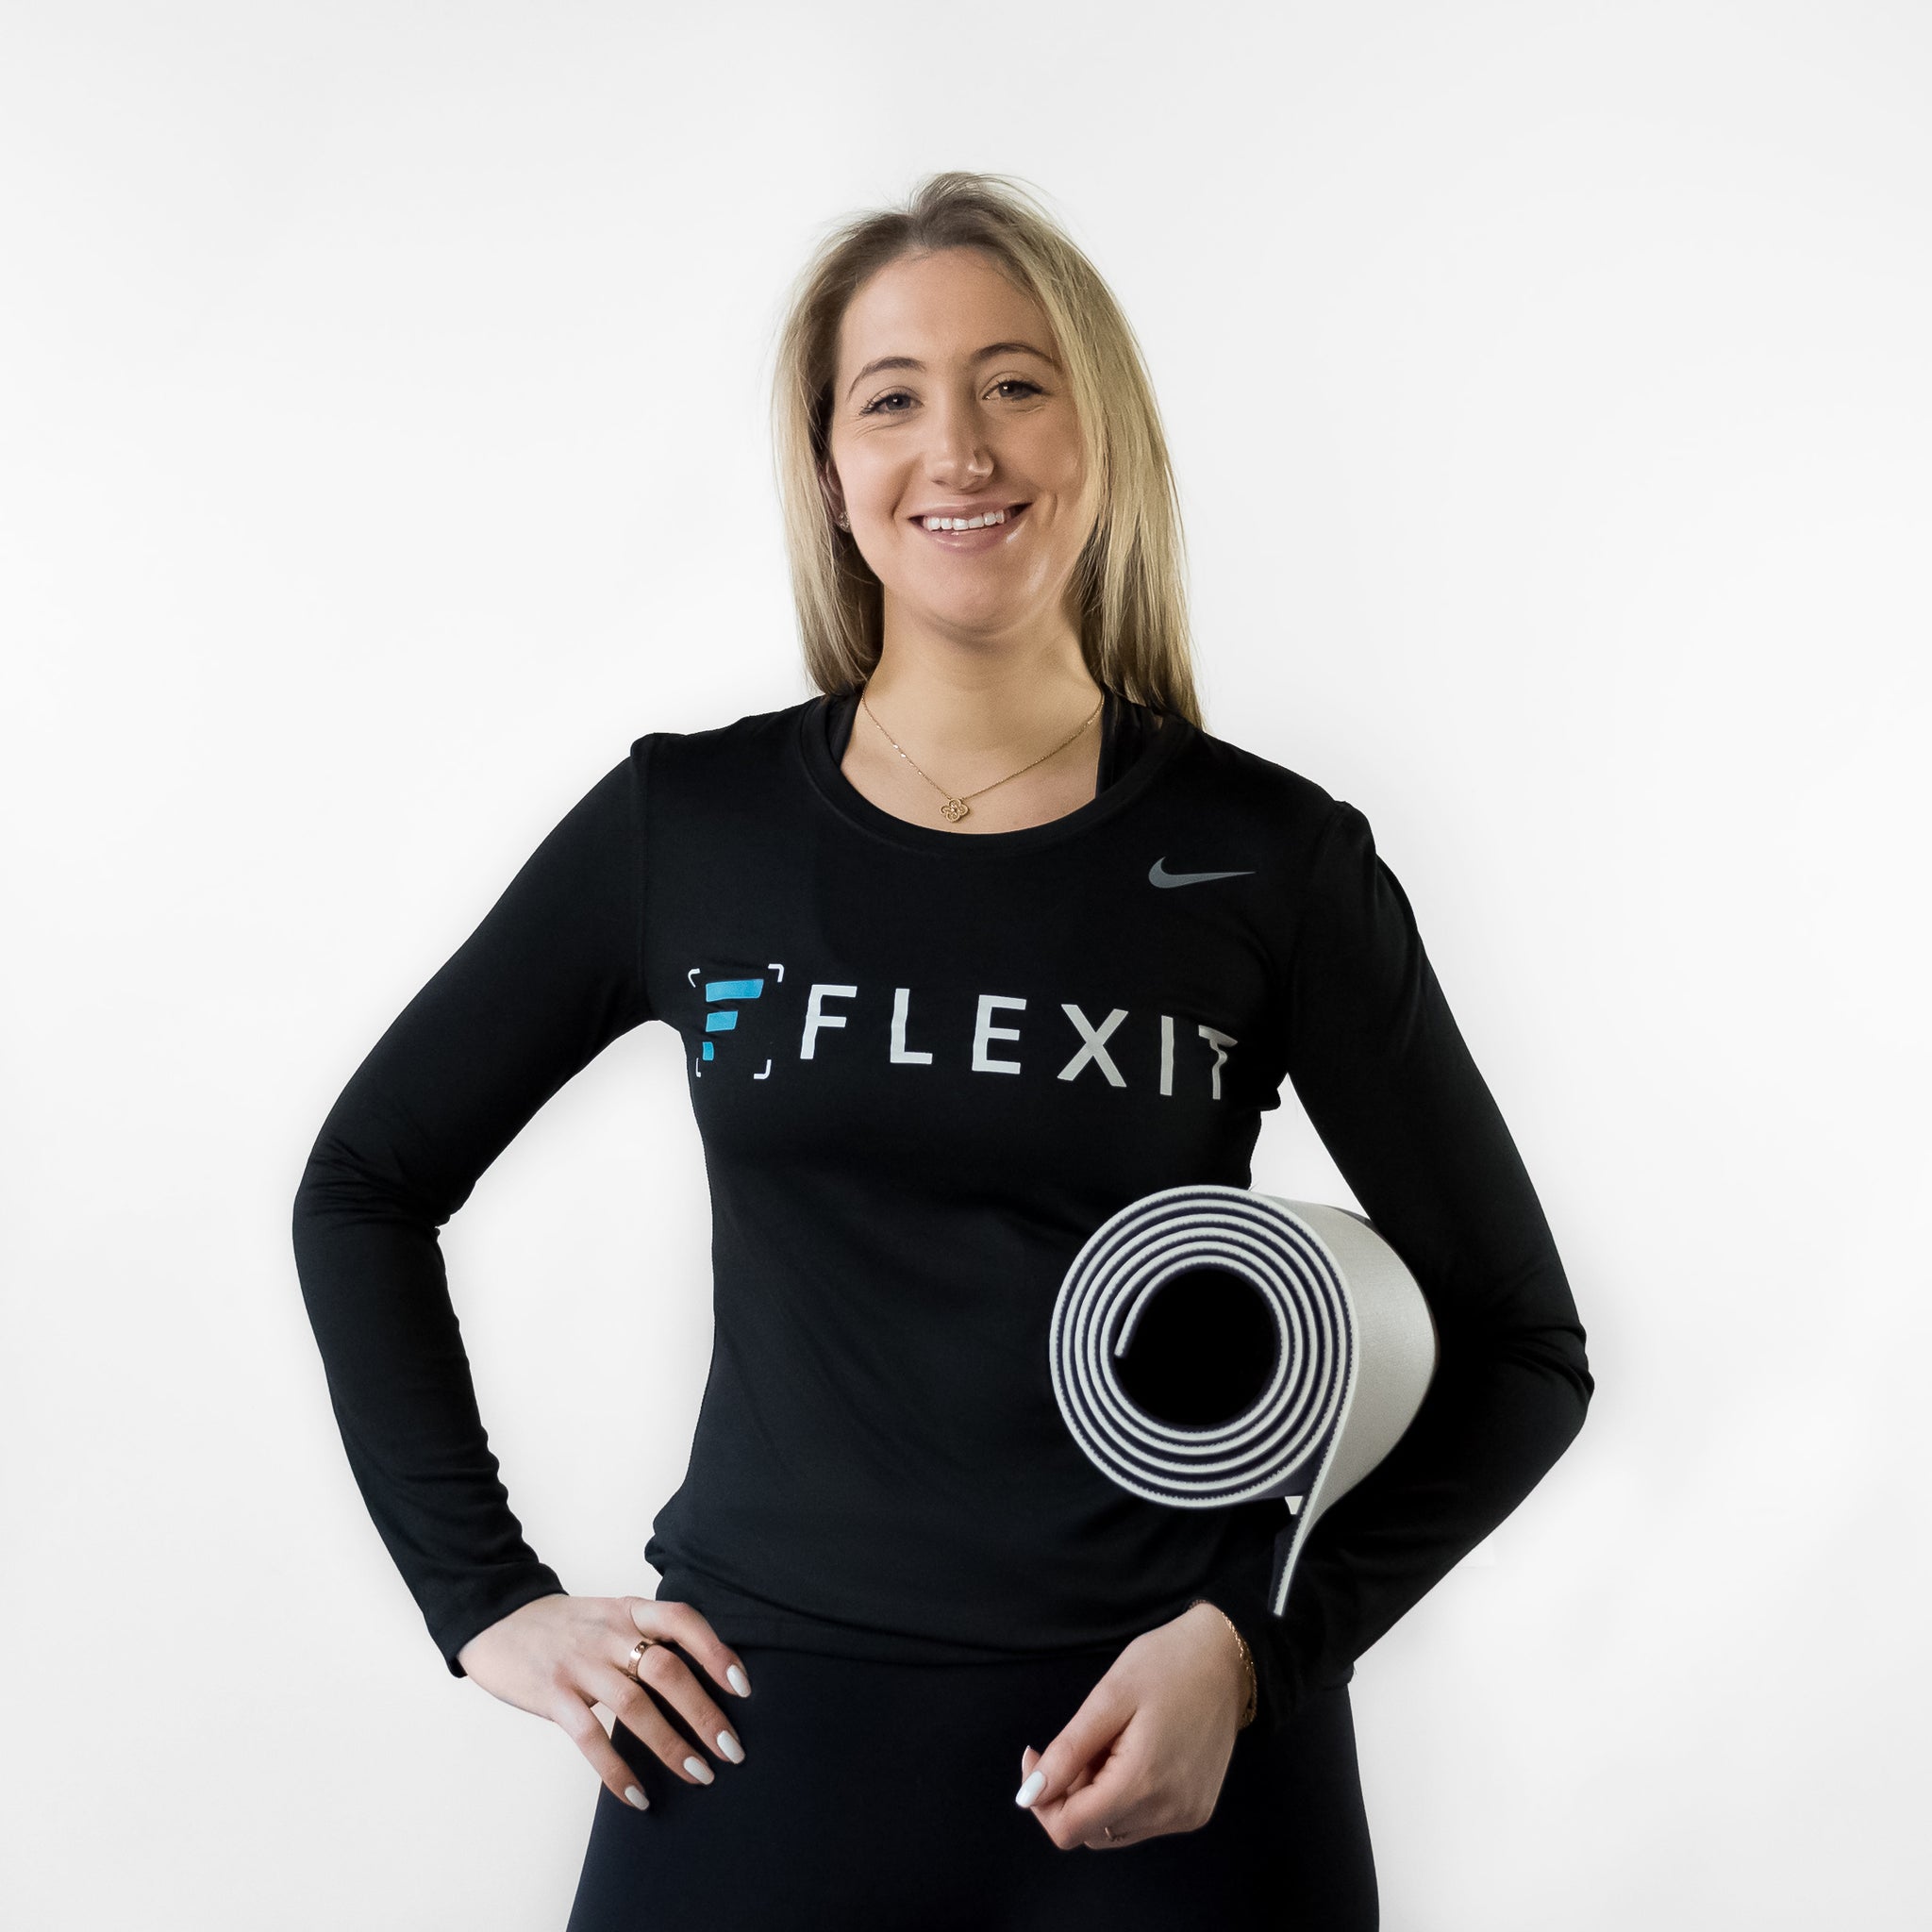 Woman holding FlexIt yoga mat in hand.